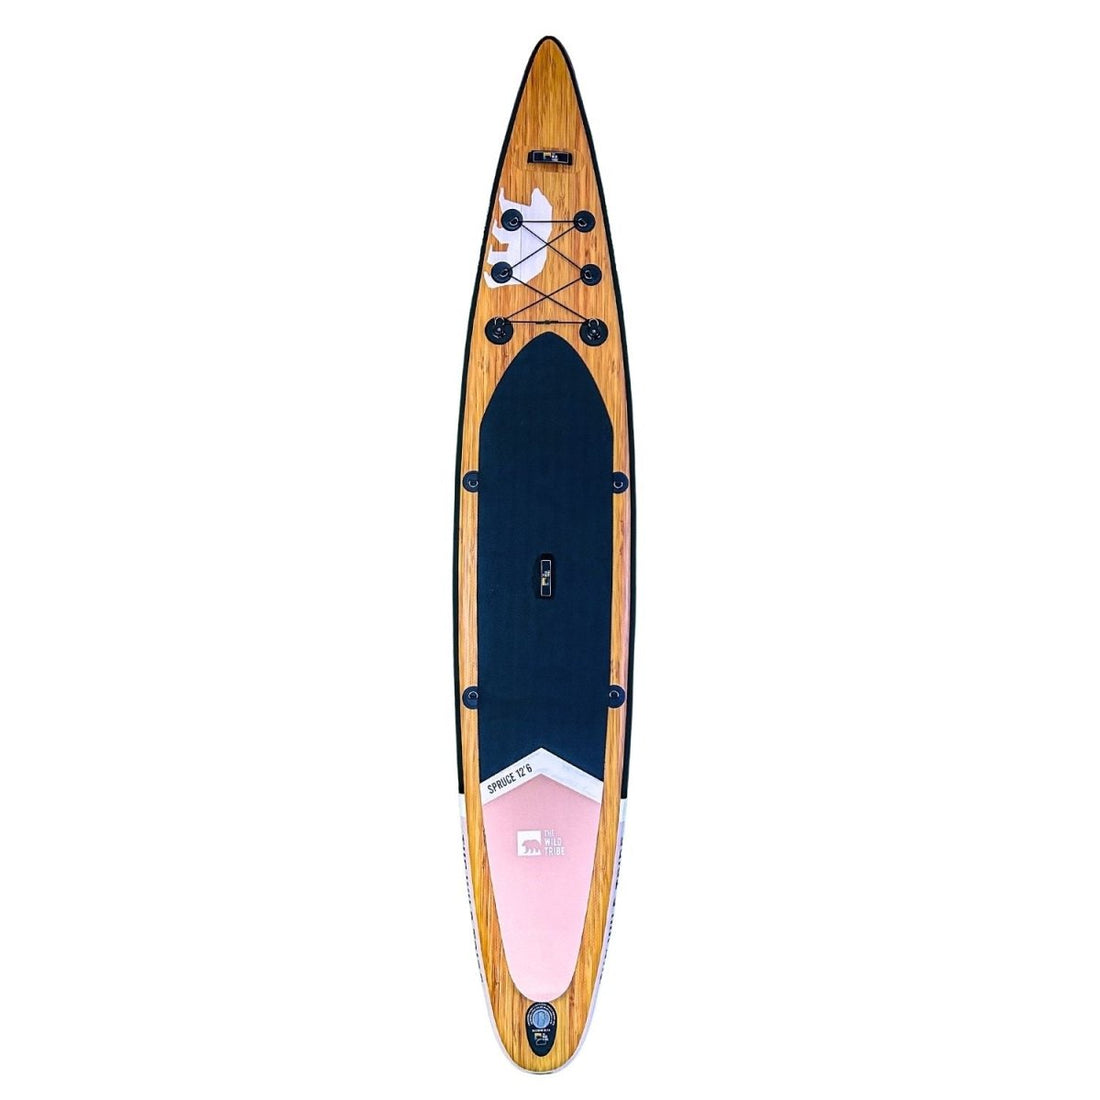 Spruce 12'6" Saumon: Paddleboard Gonflable 12'6" Touring Haut de Gamme - Quebec SUP